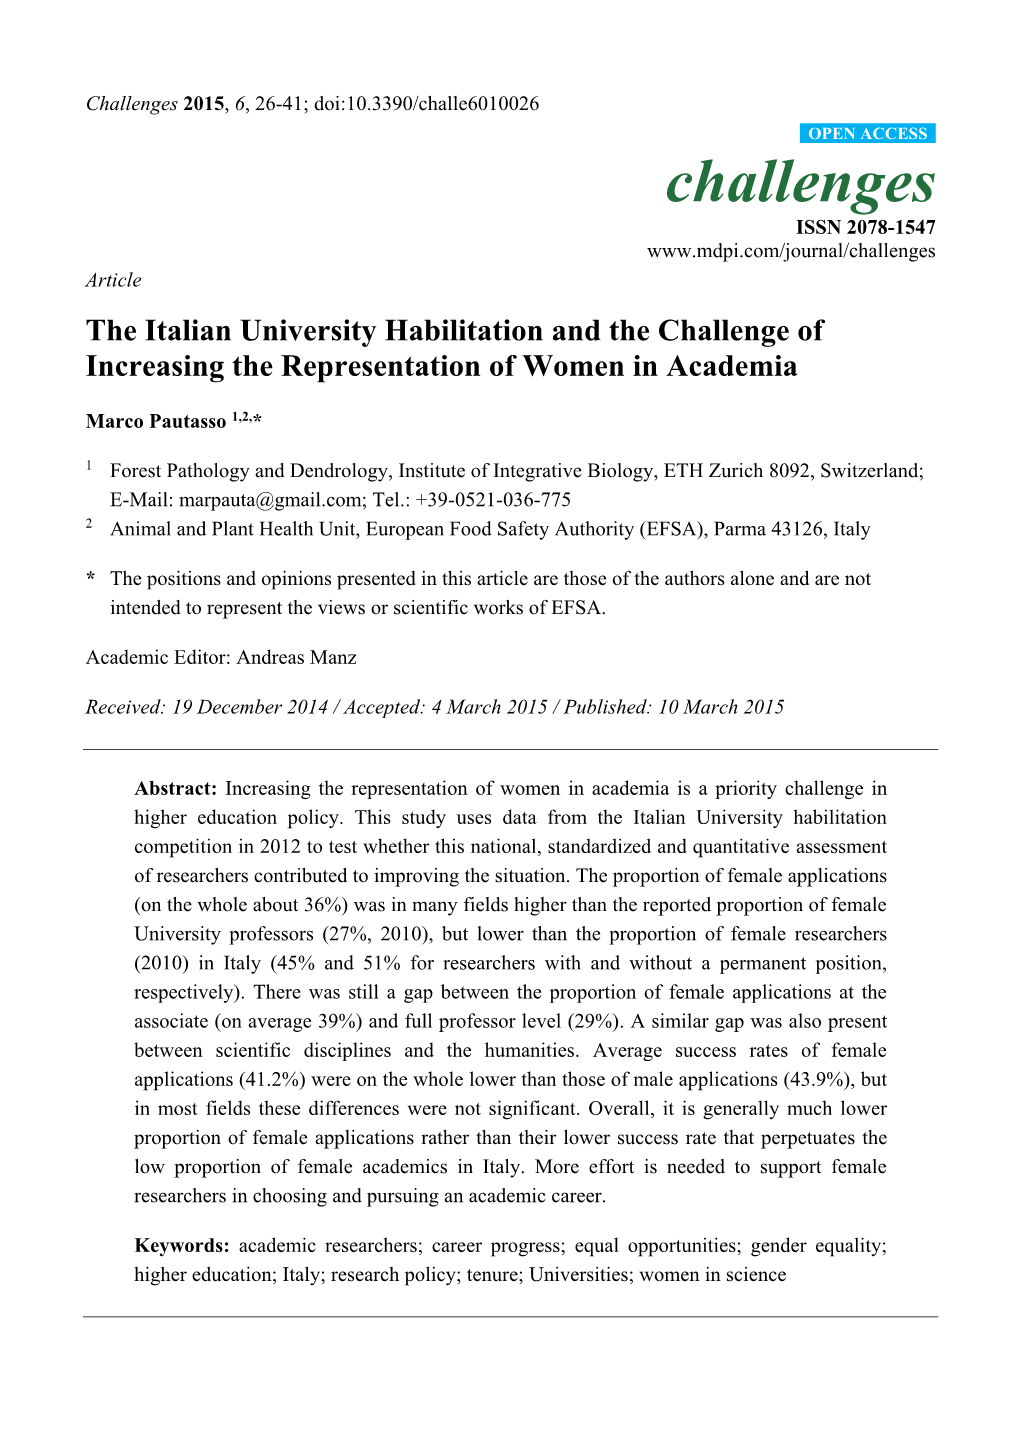 The Italian University Habilitation and the Challenge of Increasing the Representation of Women in Academia